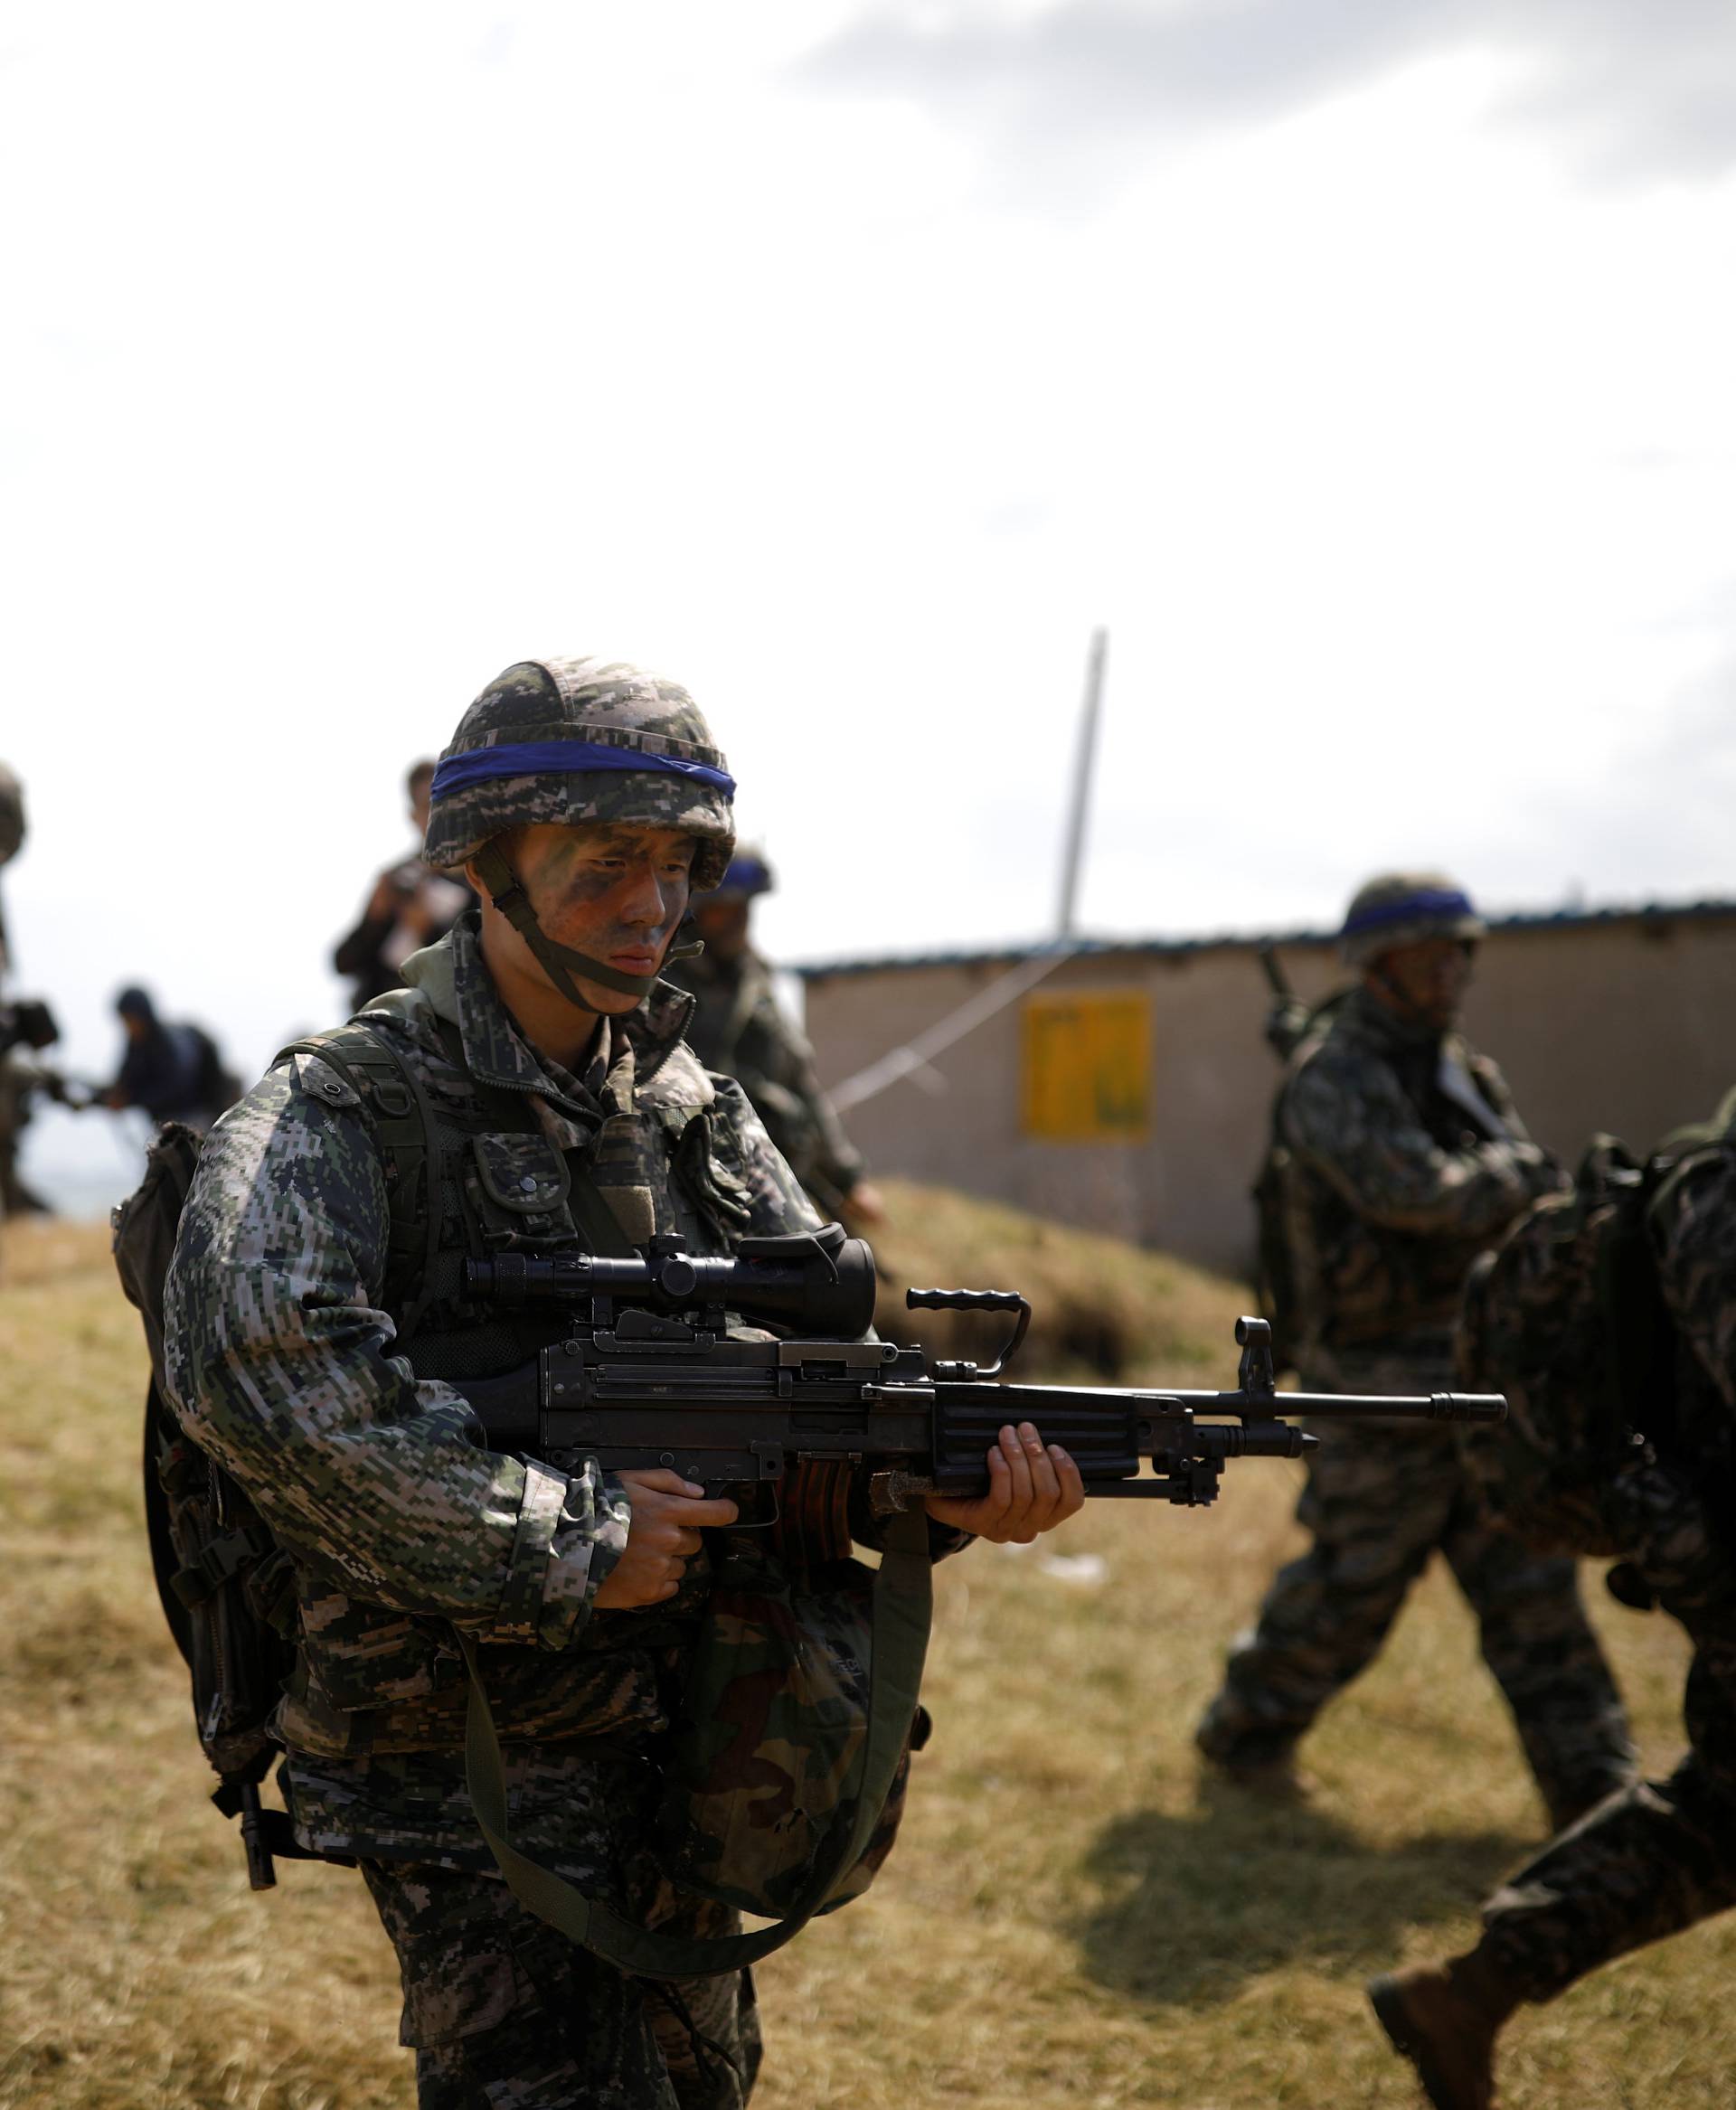 South Korean marines take part in a U.S.-South Korea joint landing operation drill as a part of the two countries' annual military training called Foal Eagle, in Pohang